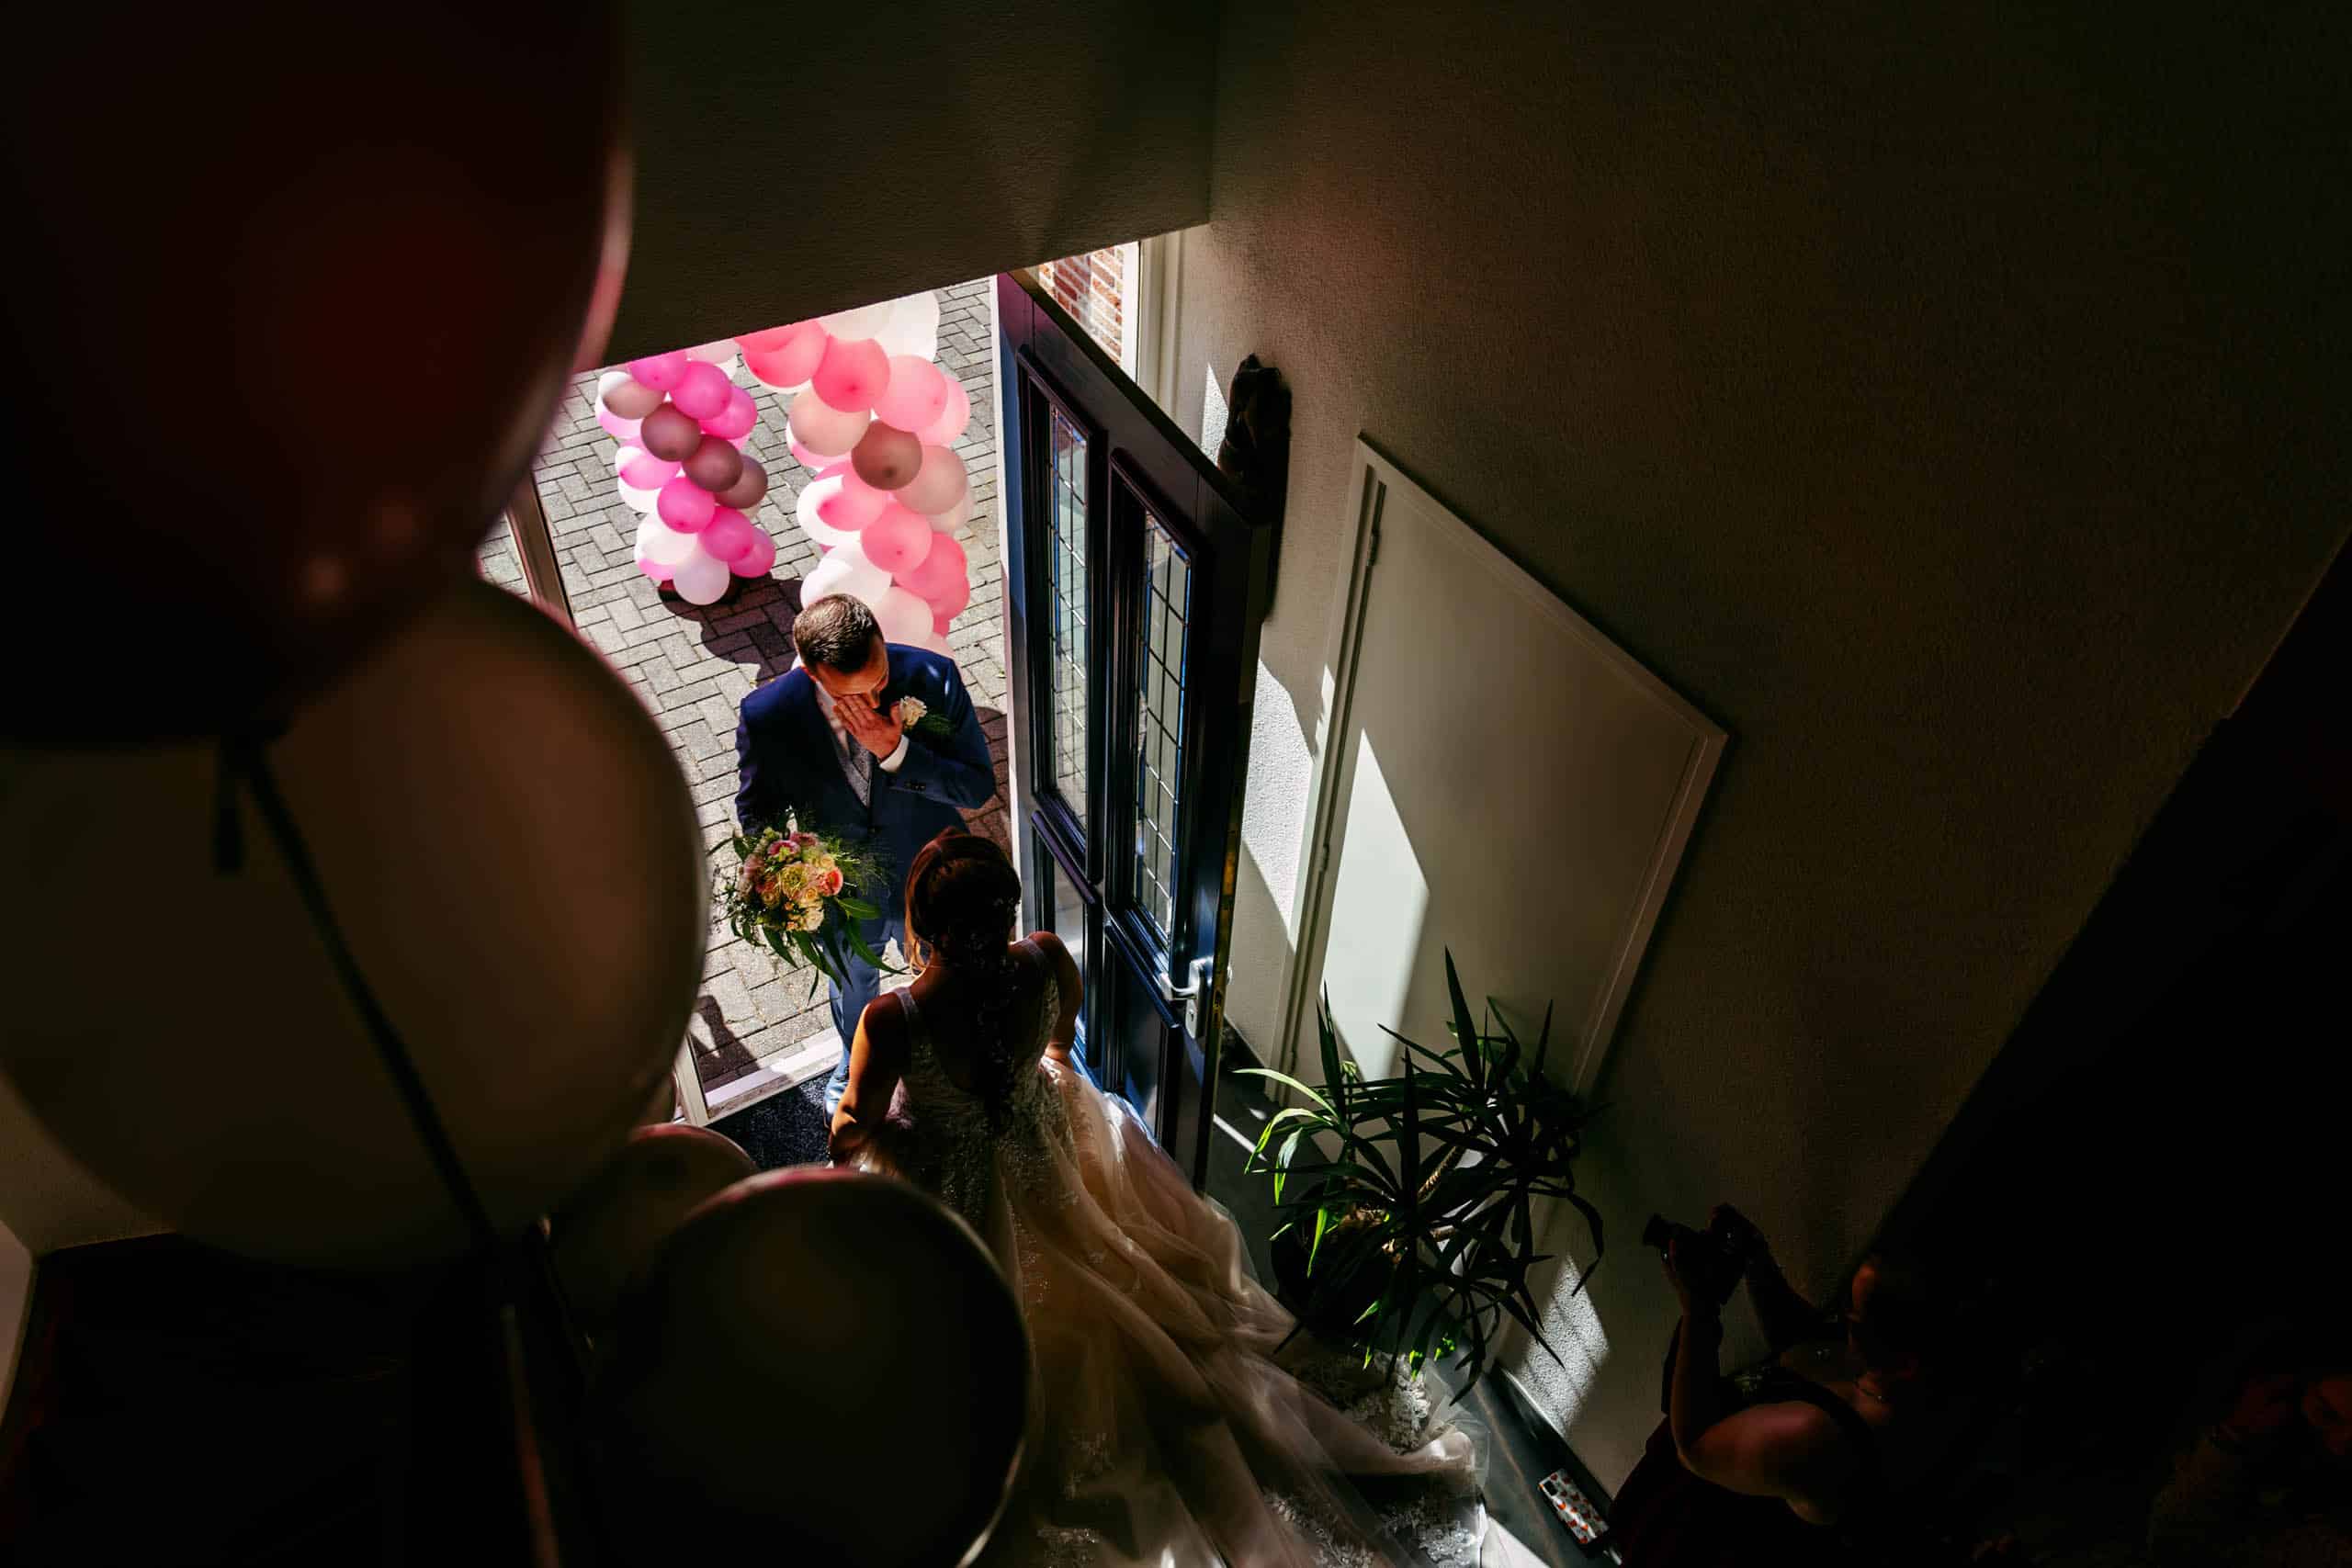 A bride and groom walking down the aisle with balloons and taking special wedding photos